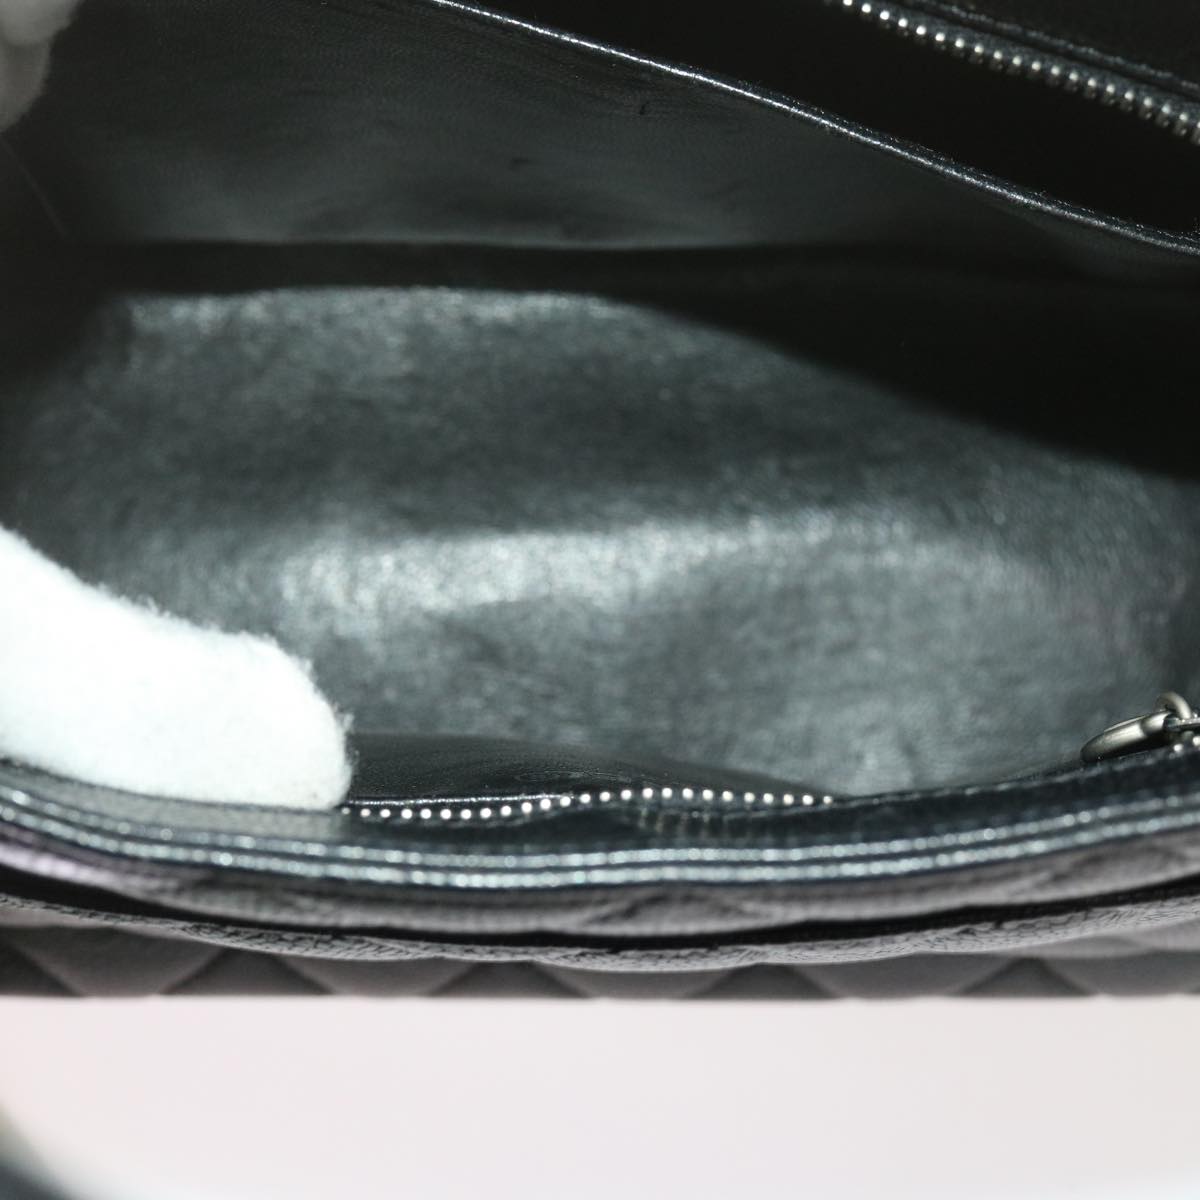 Pre-owned Chanel Black Leather Tote Bag ()